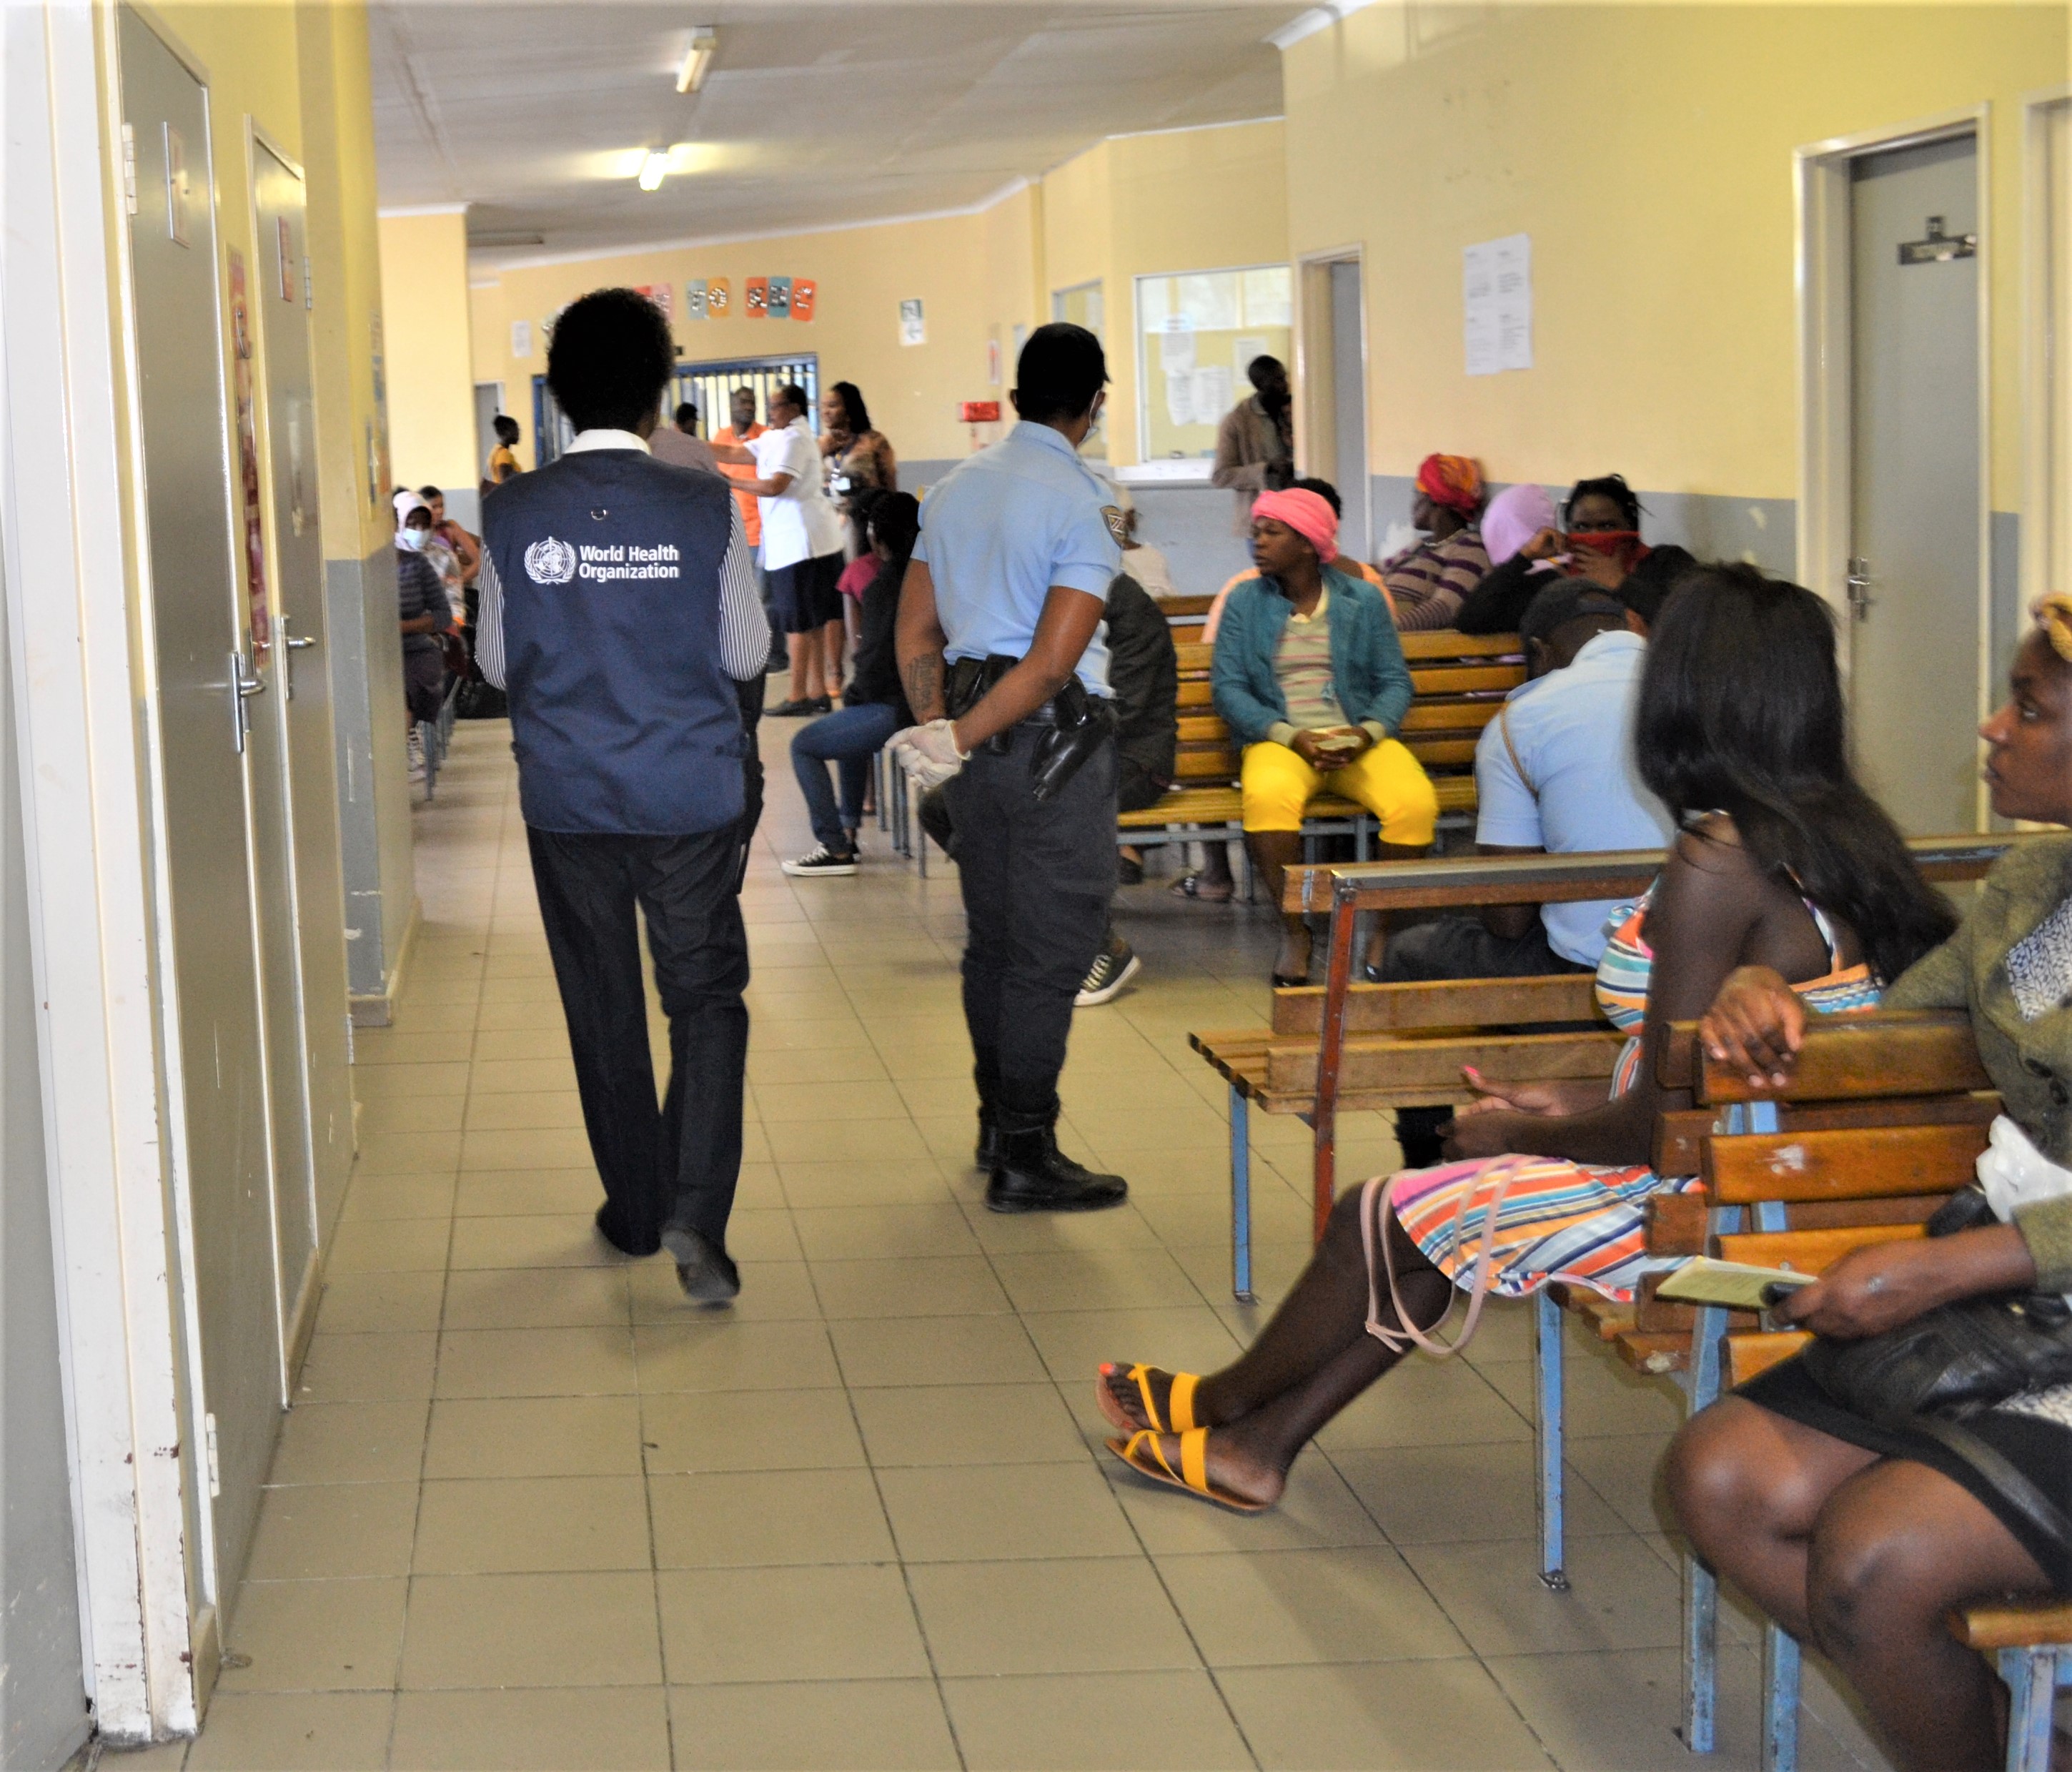 Infection prevention and control team supporting health facilities to ensure facility's readiness and response when handling suspected COVID-19 cases  